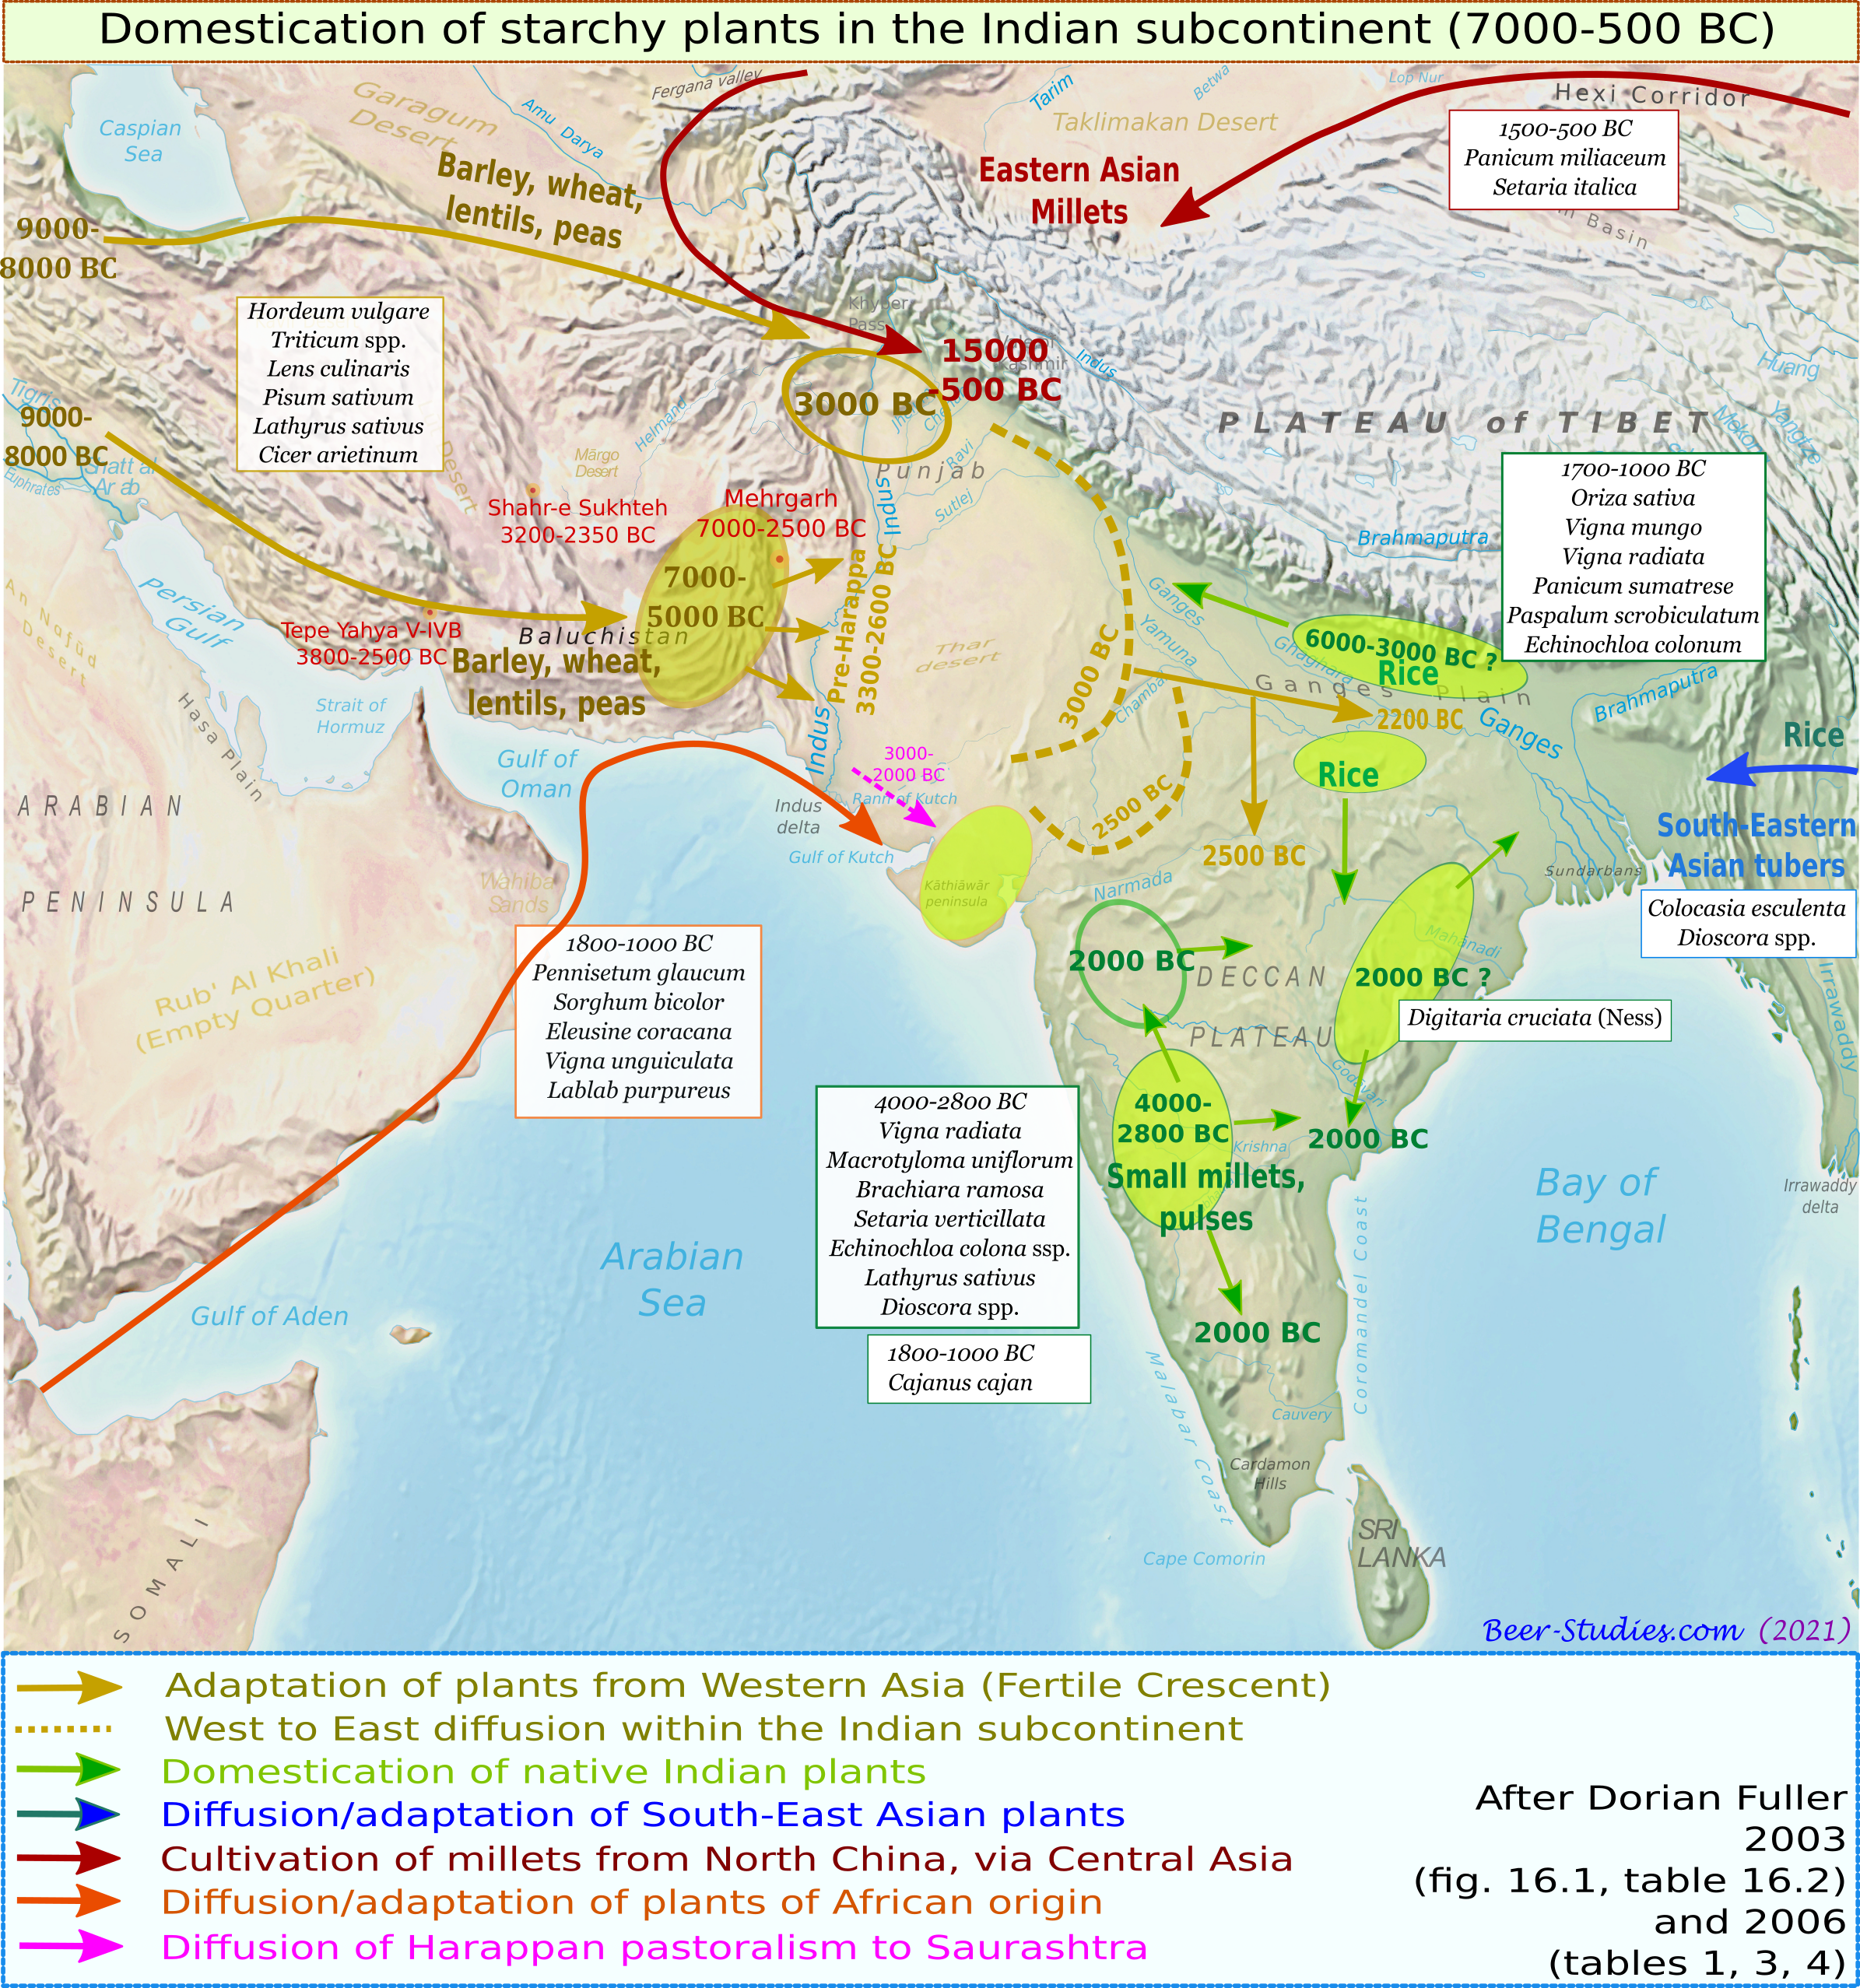 Domestication and diversity of starchy plants in the Indian subcontinent.